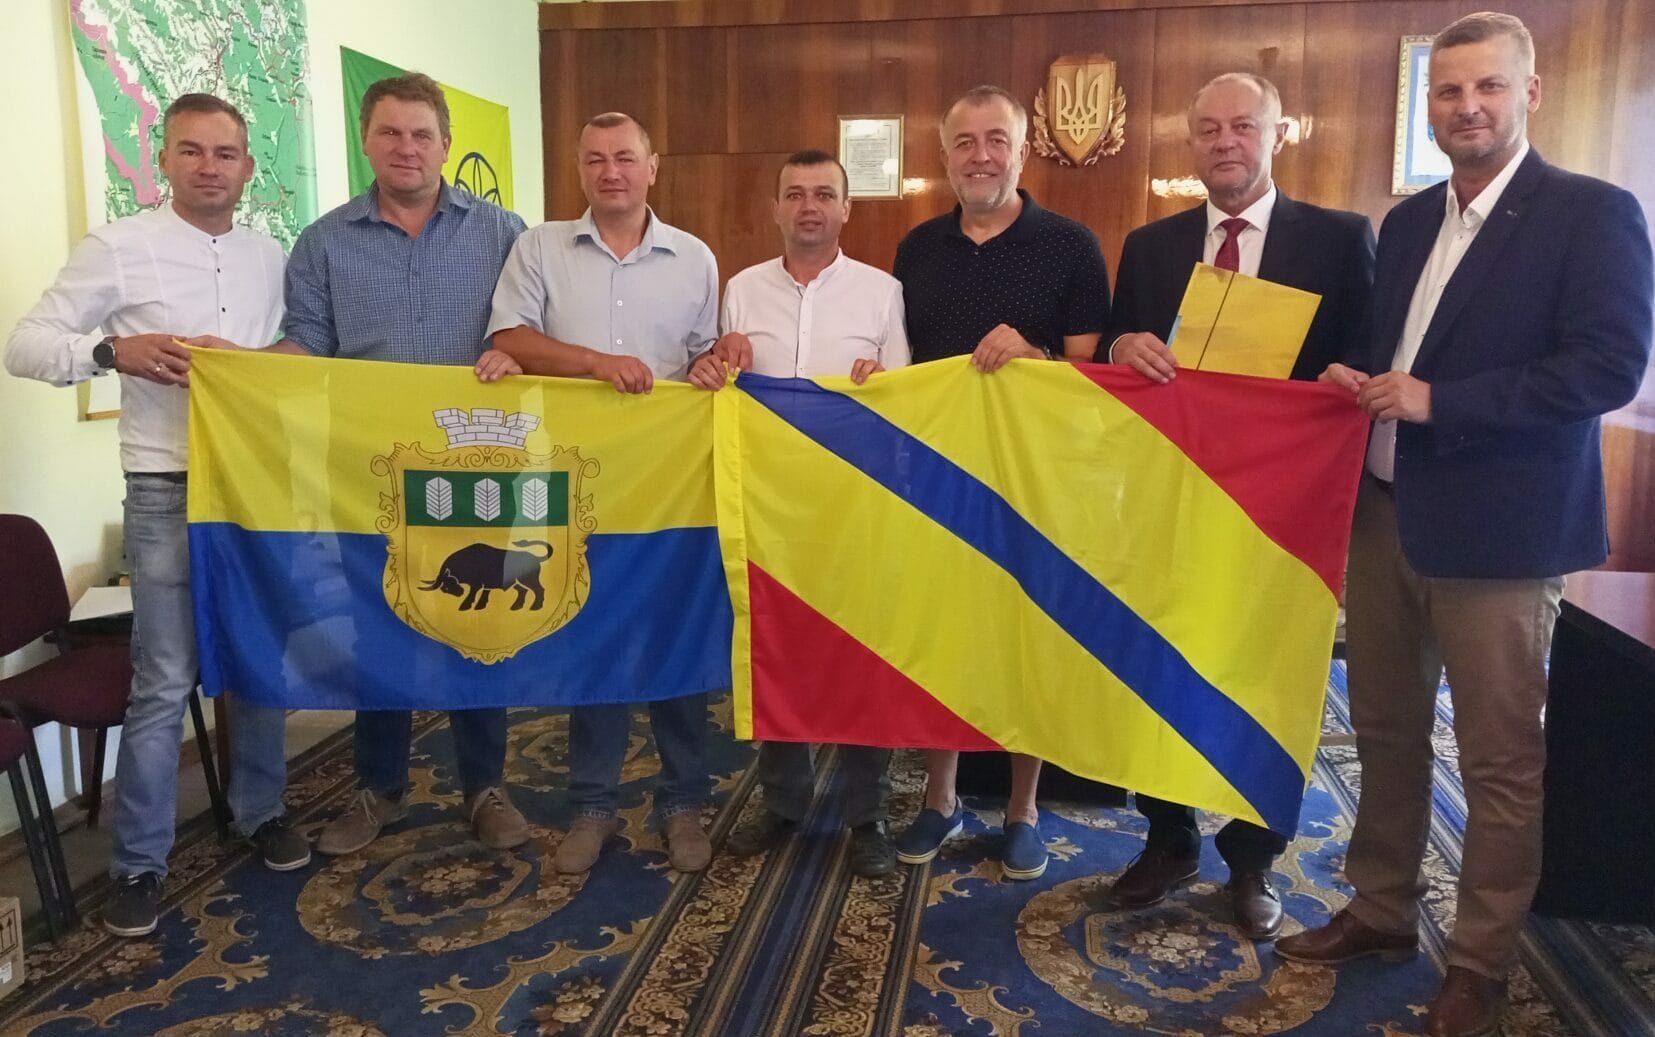 The head of the community with colleagues and partners from the town of Hranice